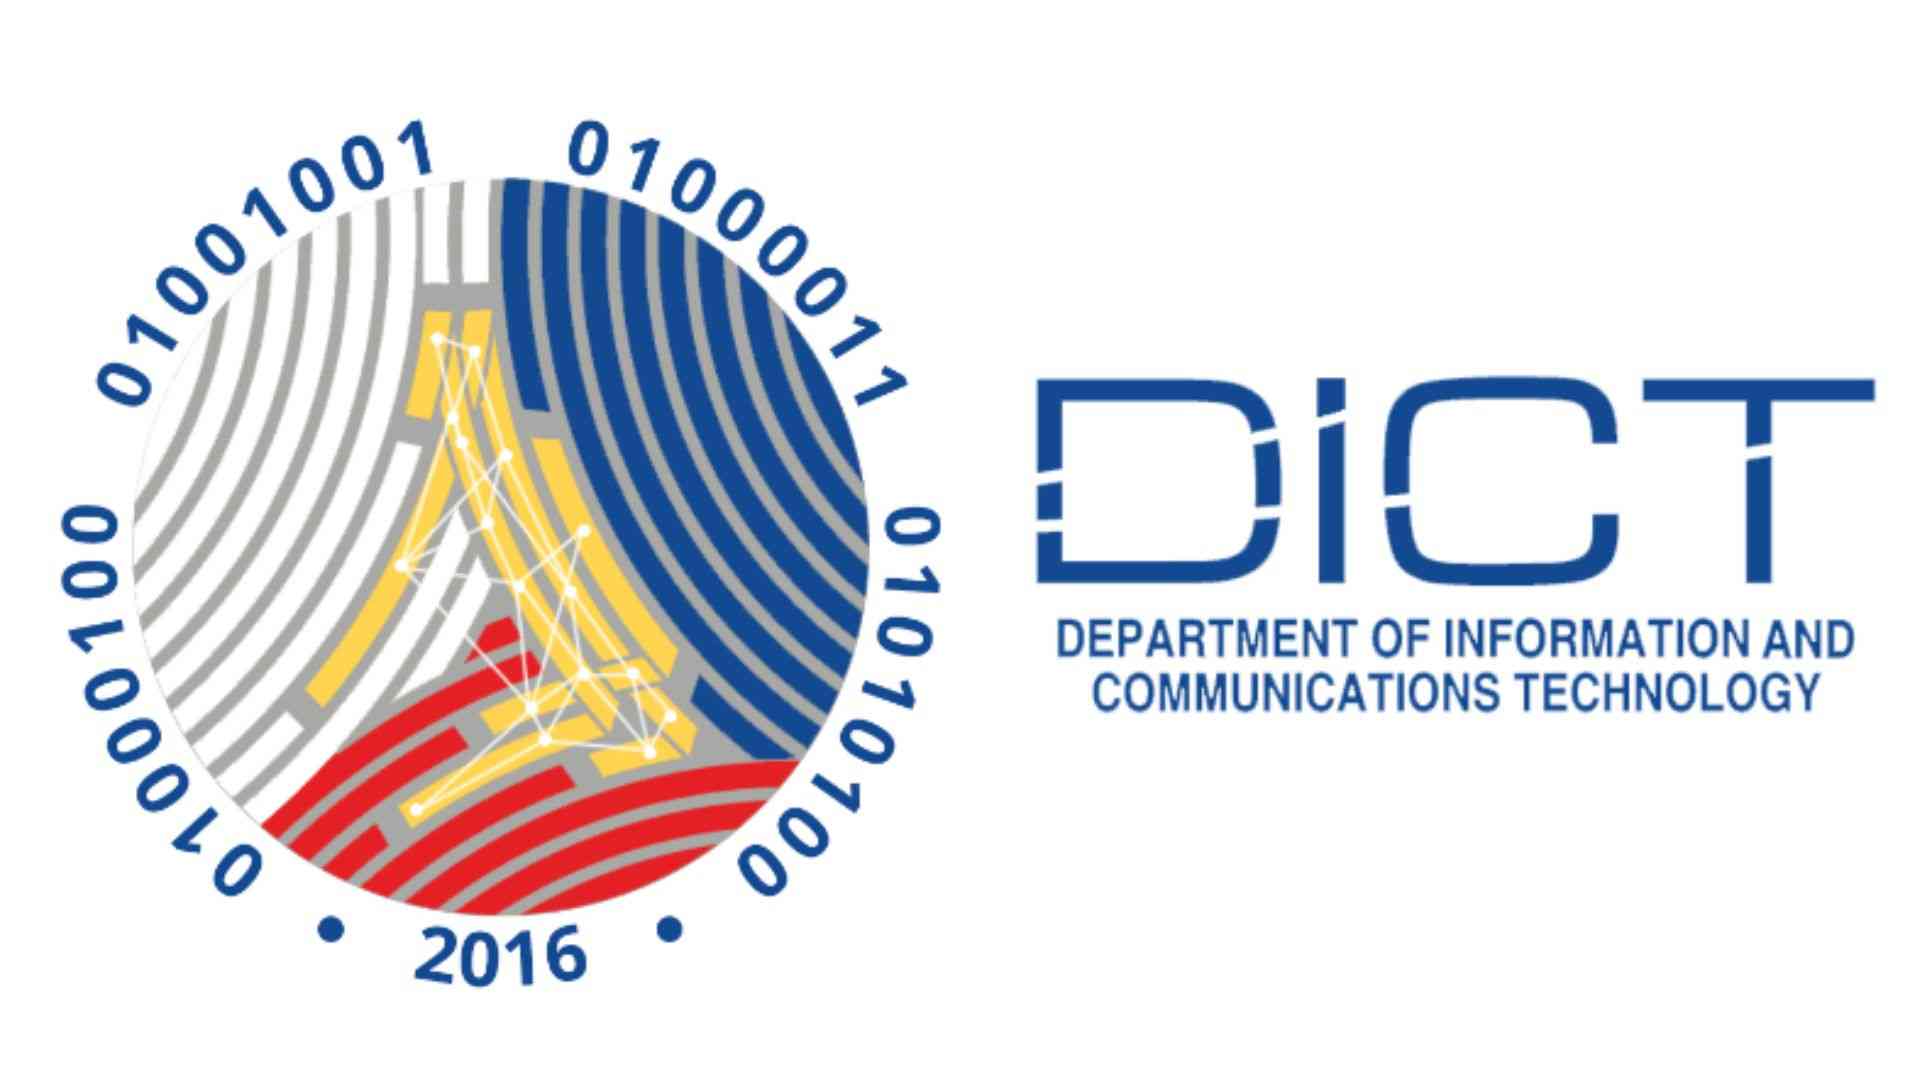 DICT assures focus on global cyber outage